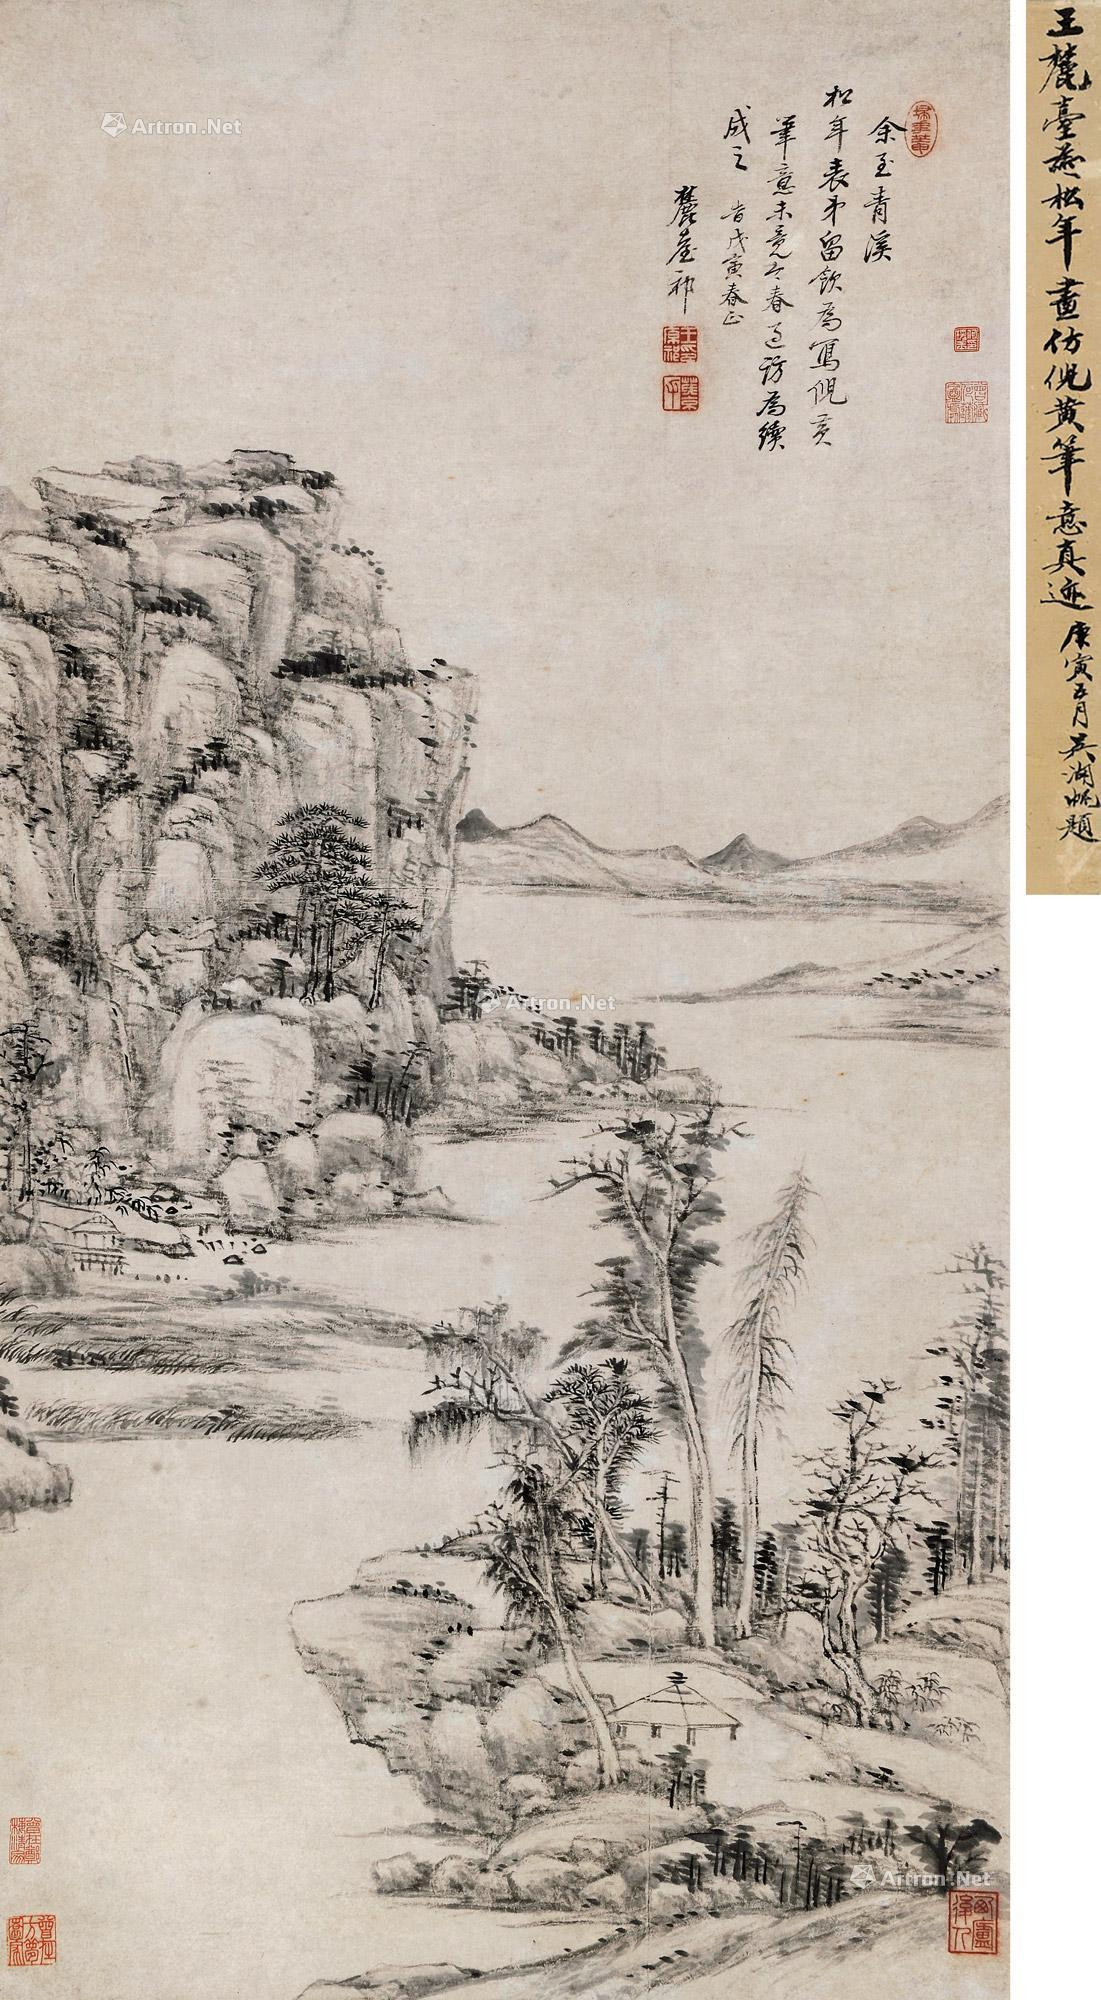 LANDSCAPE IN THE STYLE OF NIZAN AND HUANG GONGWANG